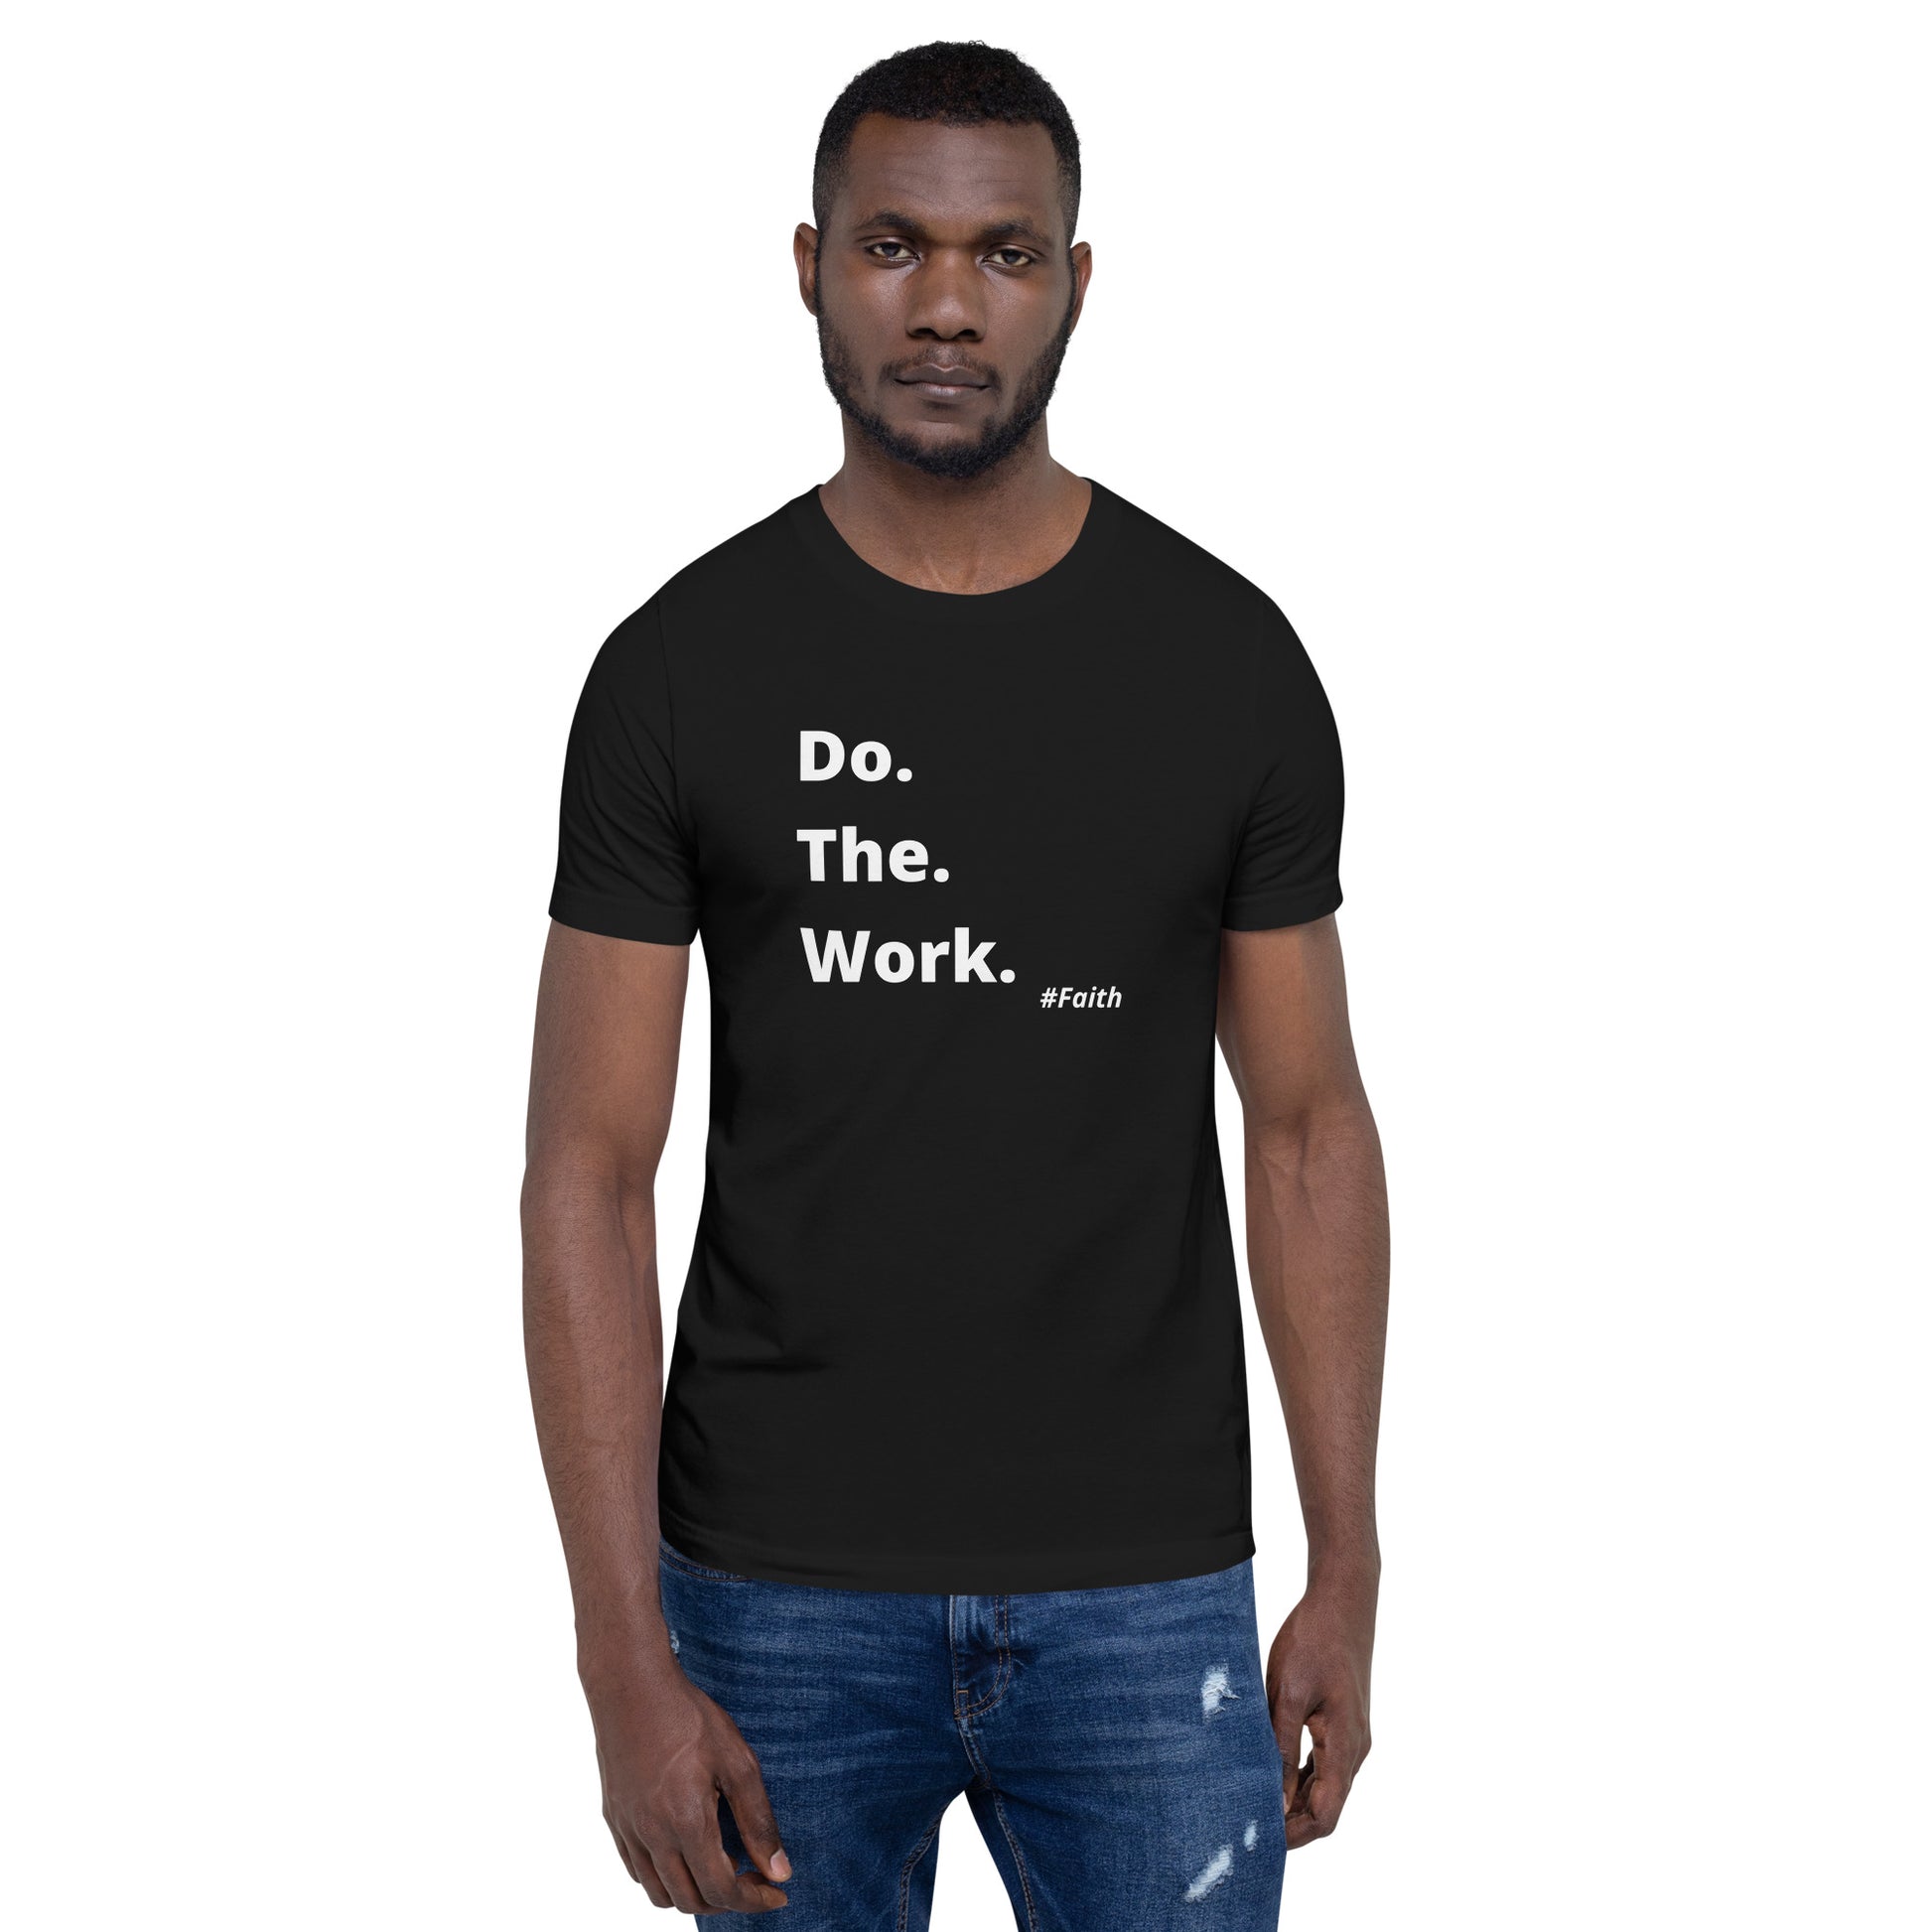 Do. The. Work. Short-Sleeve Unisex - F.A.I.T.H. Black – Connection T-Shirt